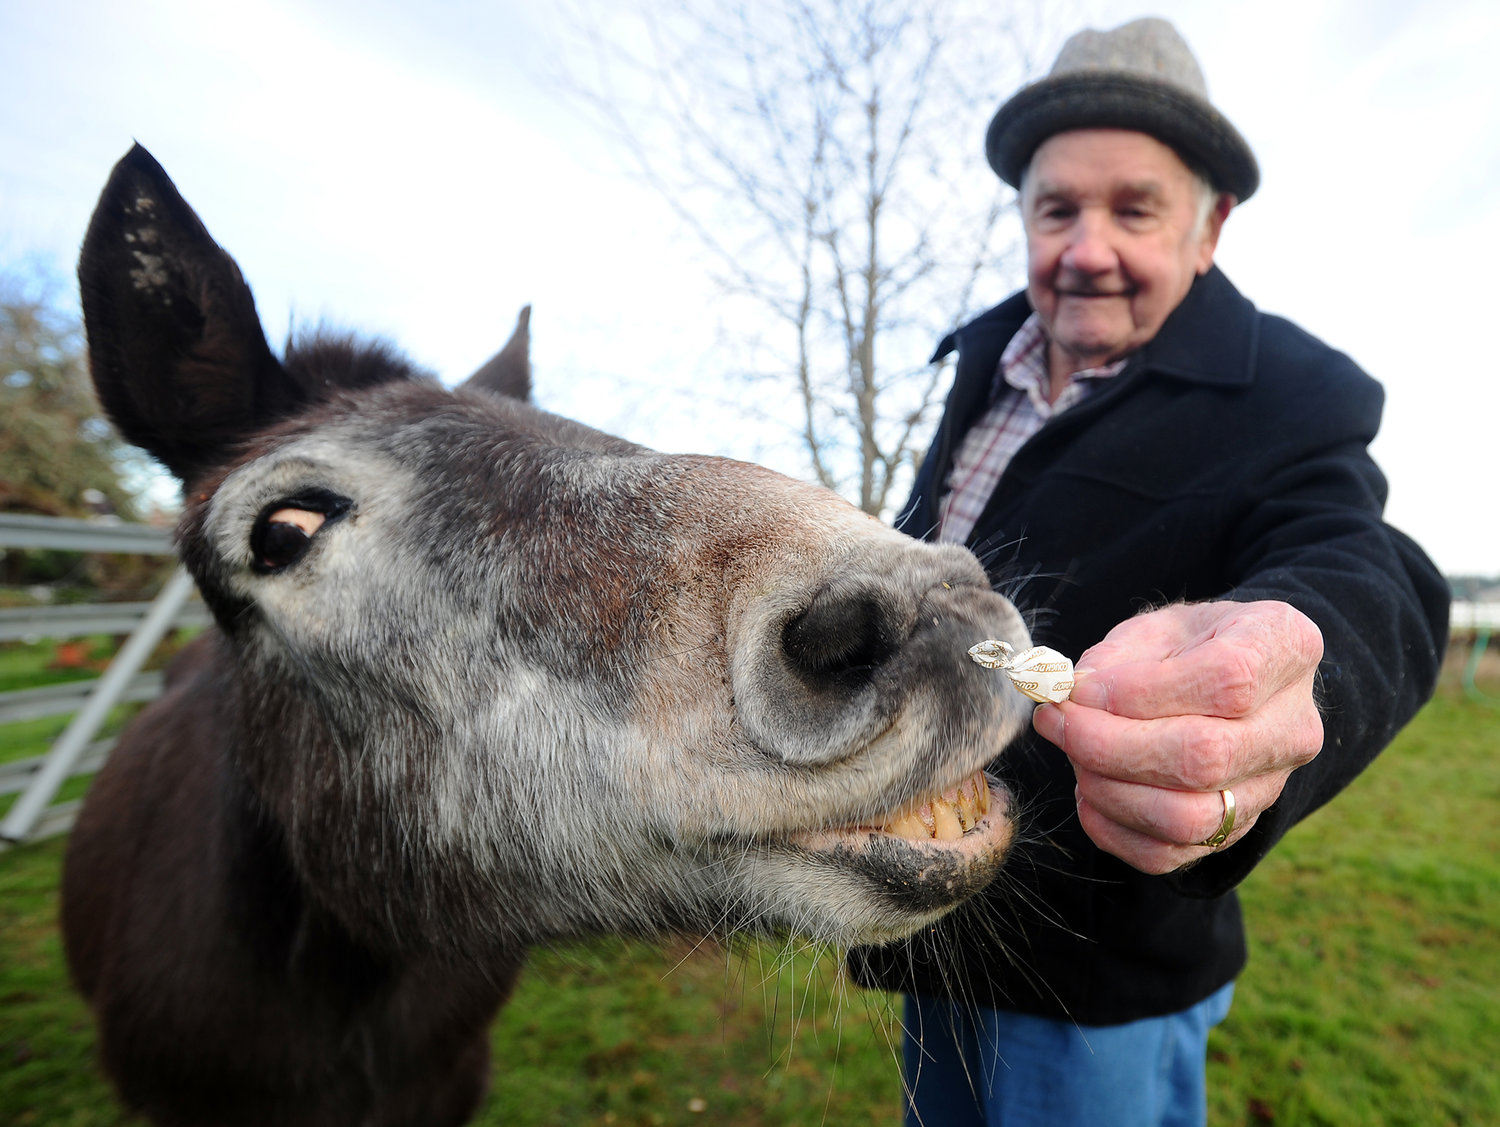 Herb Yantis feeds his 50-year-old mule, Ted, a cough drop Ñ wrapper and all Ñ in the backyard pin at their home in Adna on Tuesday morning. Yantis, his wife, Bummy, and Ted will all be celebrating their birthdays in the first week of December. Ted, a former work mule, has been pampered for much of his golden years. Mules typically live between 30 and 40 years.